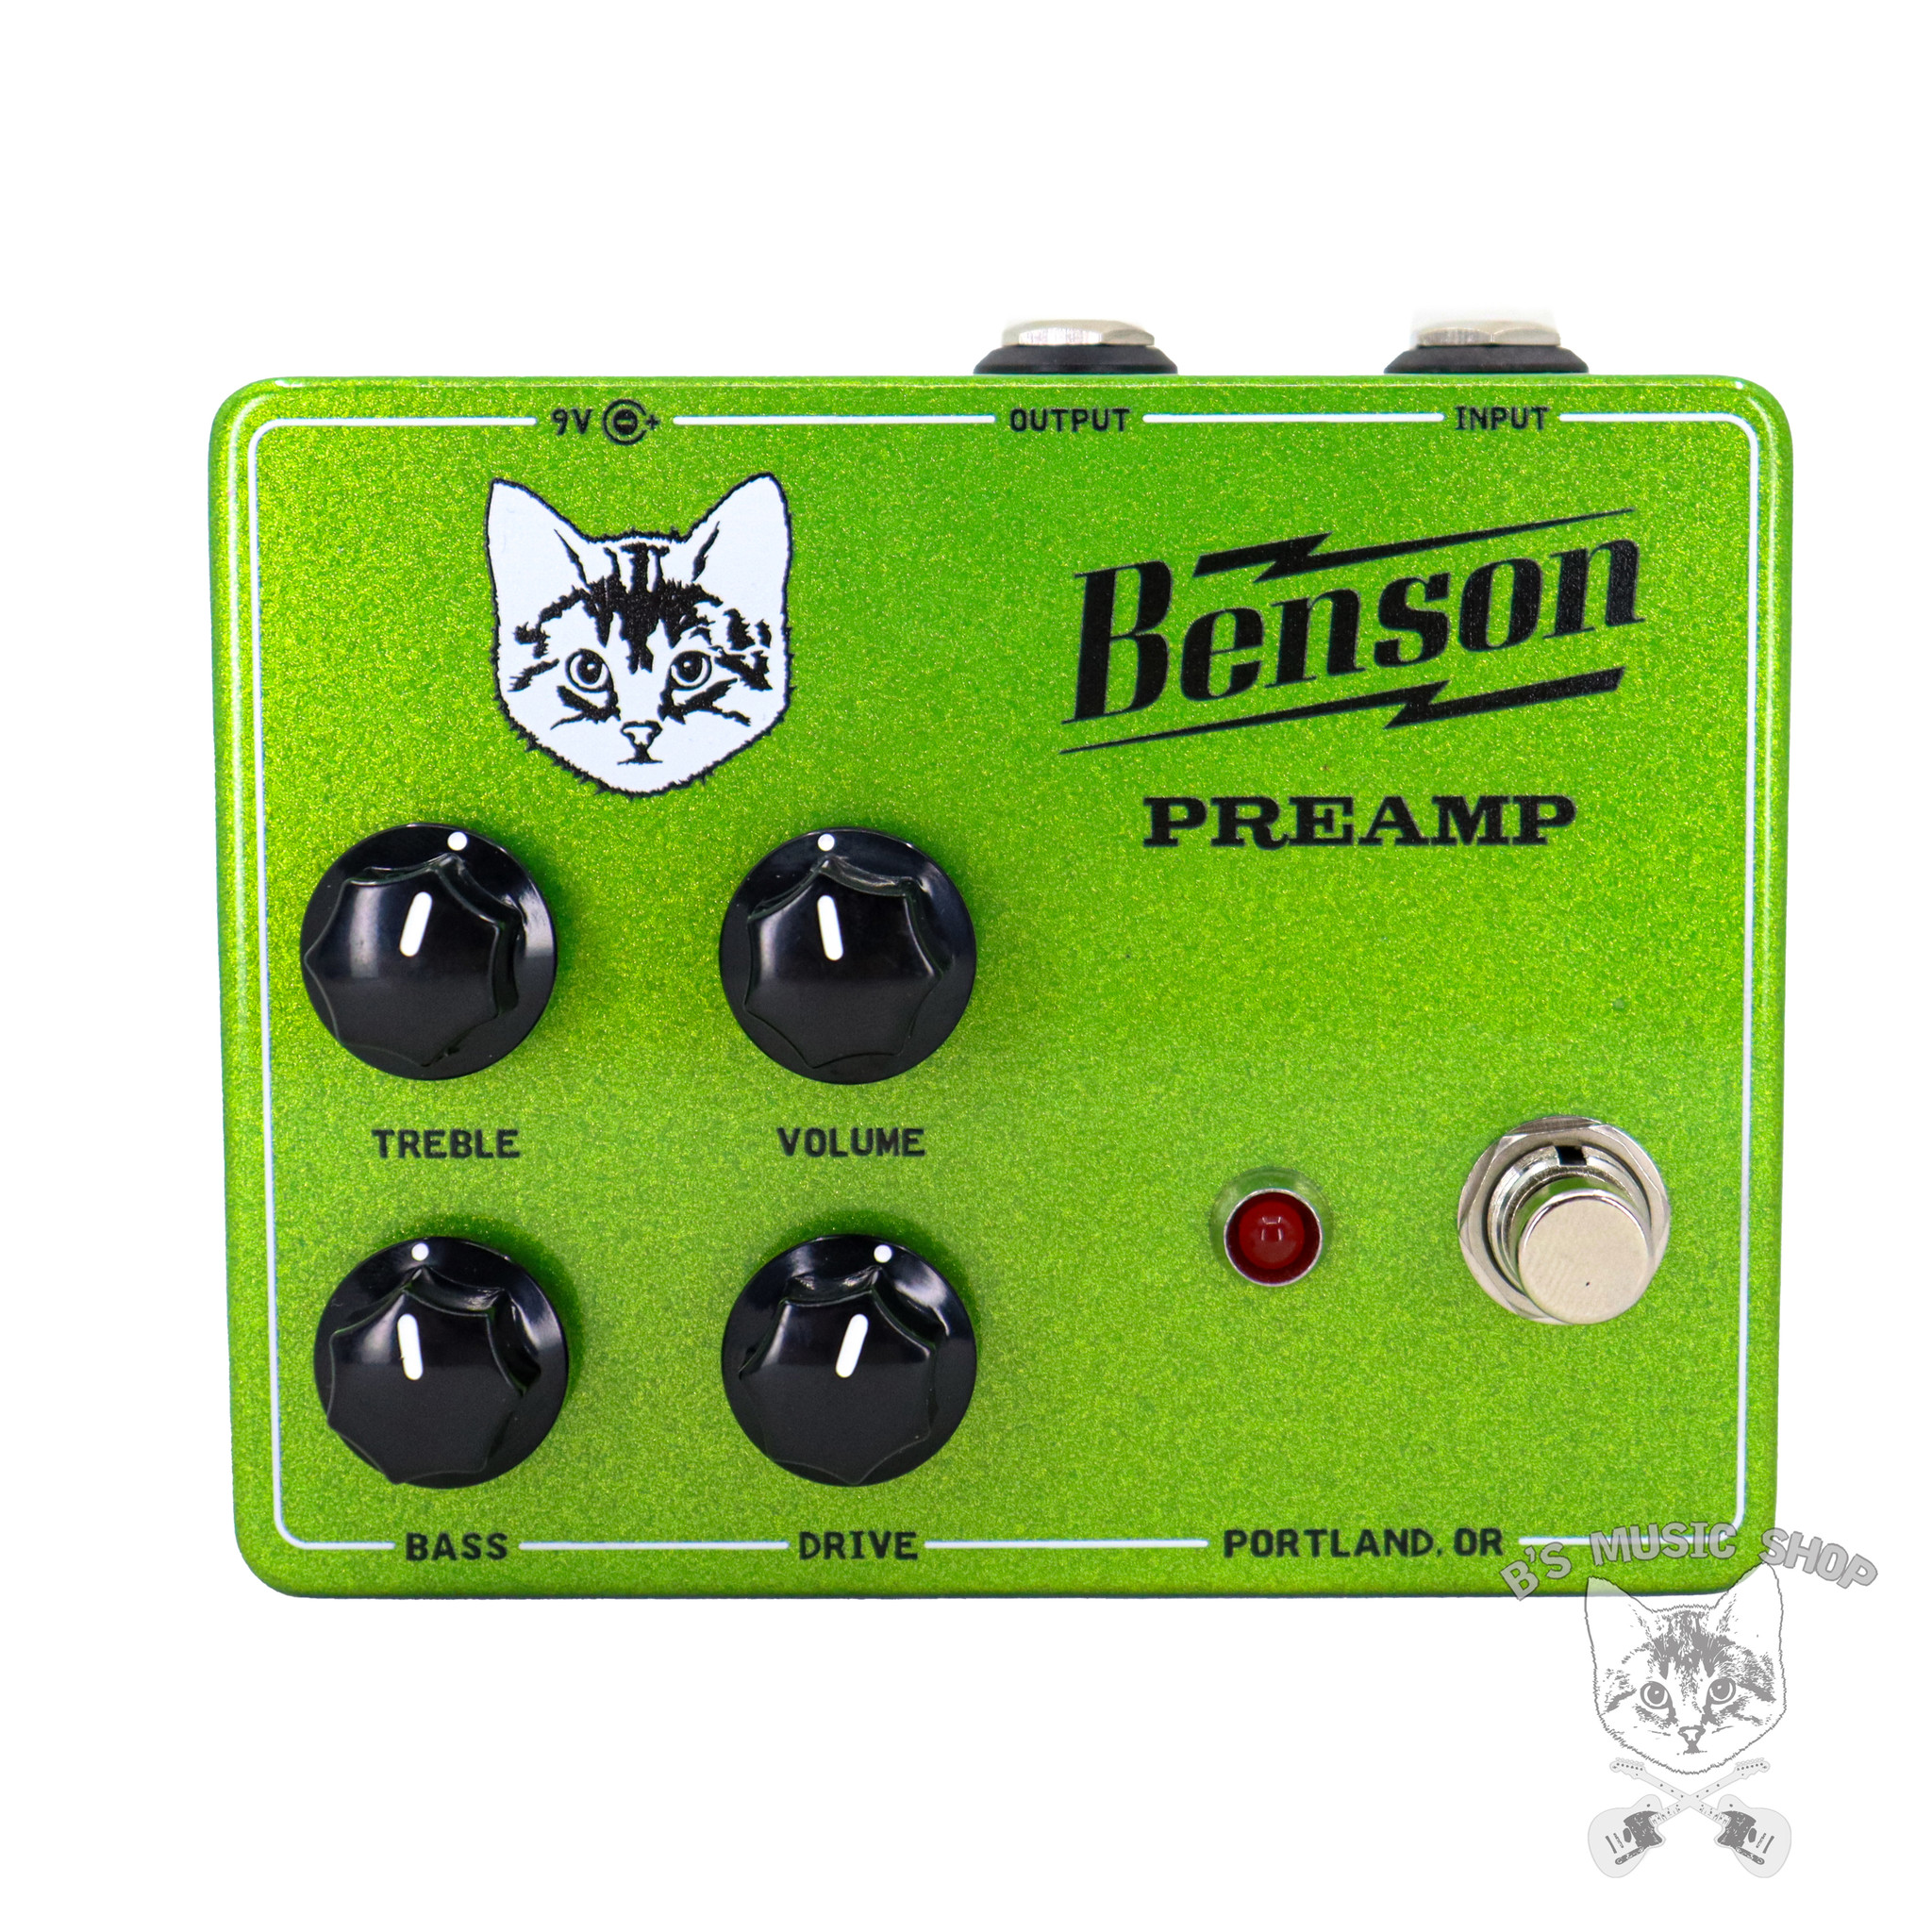 Benson Preamp - PURReamp Special Edition - B's Music Shop